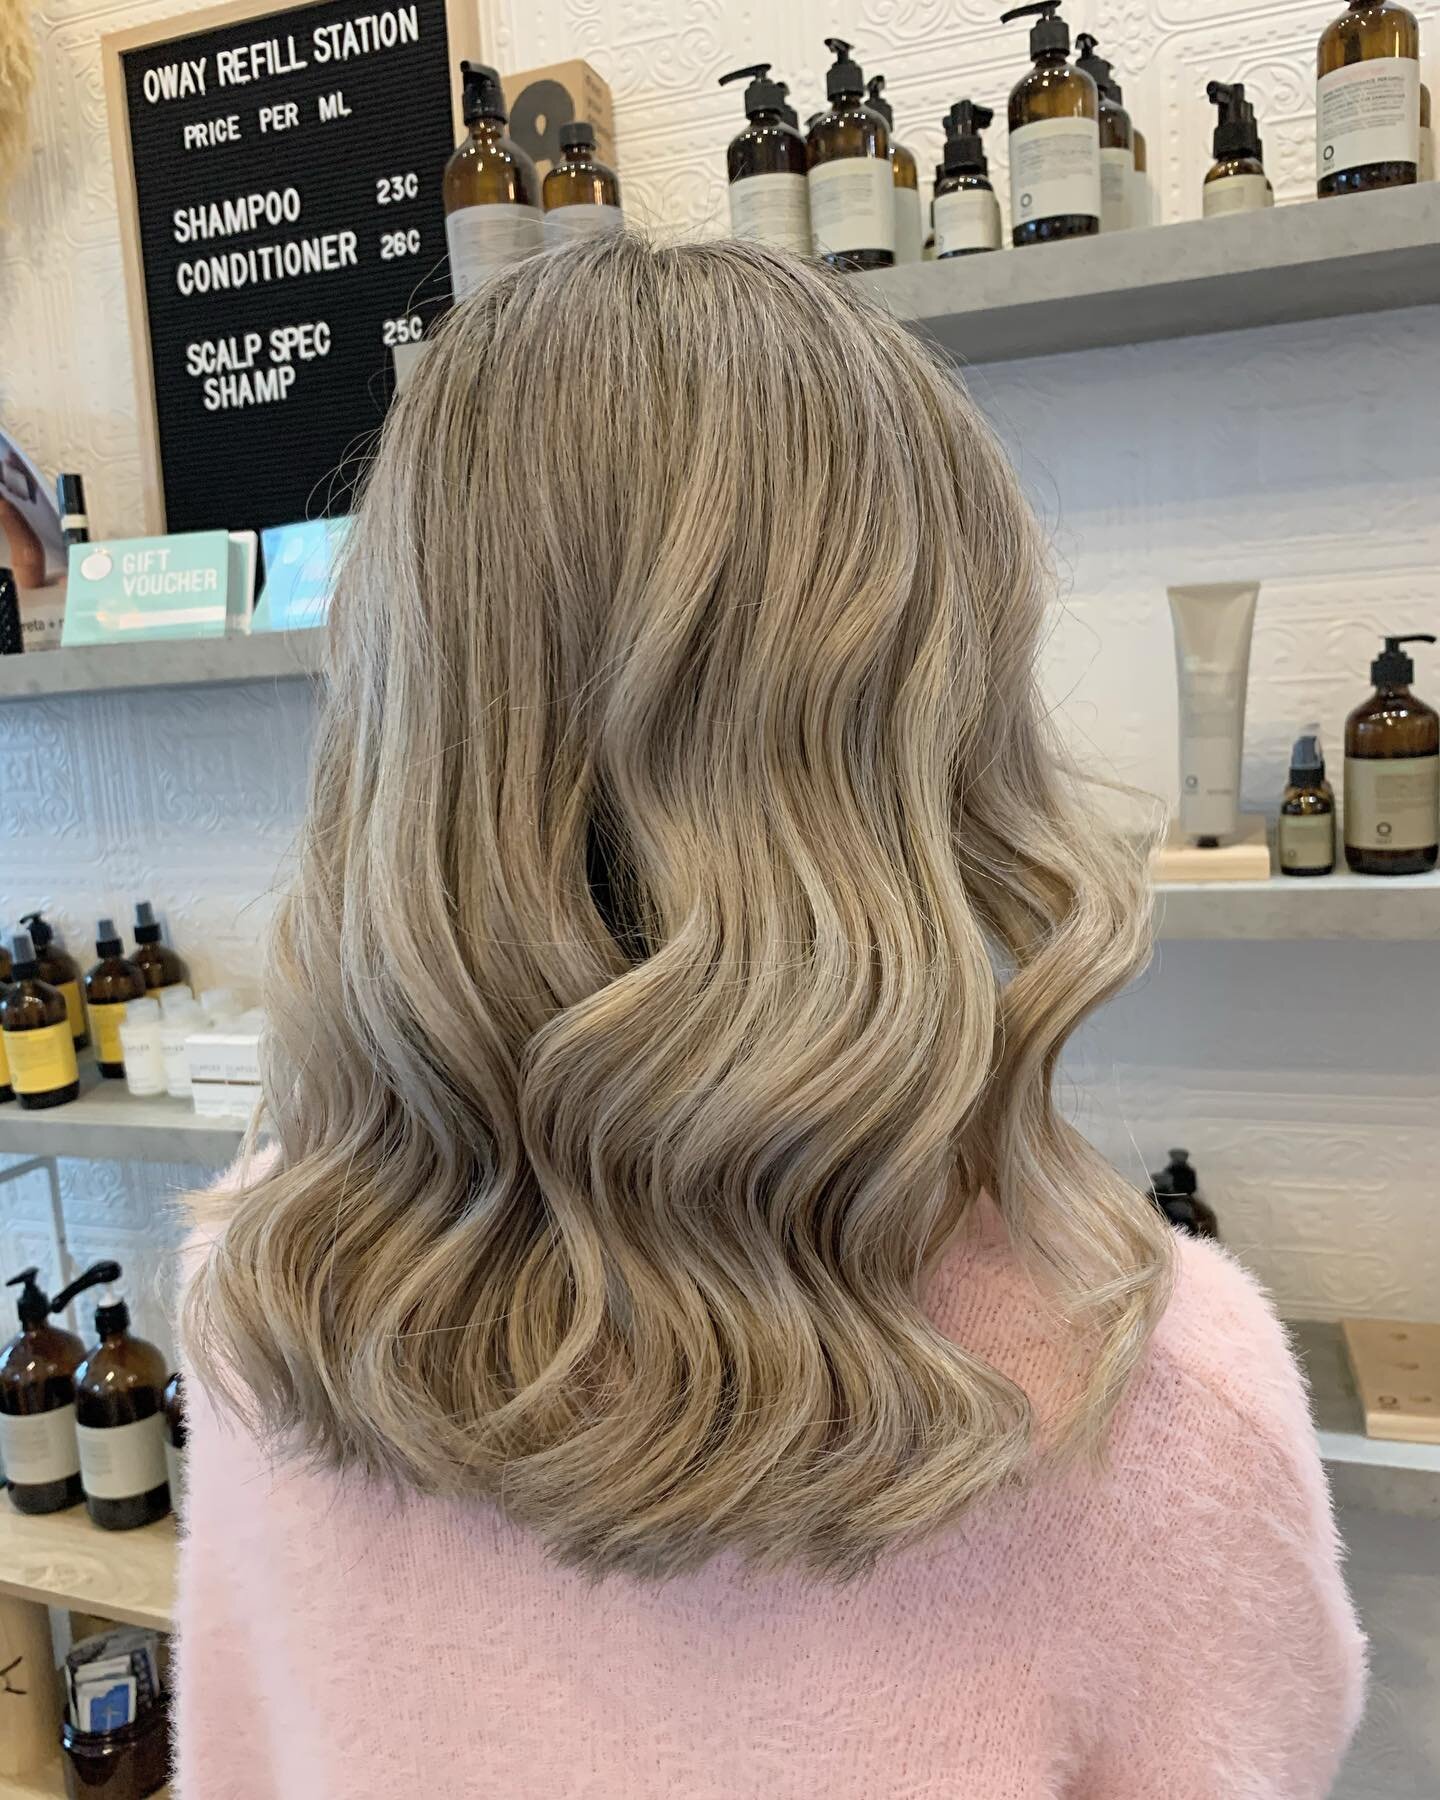 ICY BLONDE | BY SHALISA

🤍 How amazing does this colour look! Can you believe Phoebe has natural black hair 🤩 @hair.by.shalisa working her magic as always 💫

#hair#hairstyle#haircolour#haircolor#oway#owaycolour#haircut#style#fashion#beauty#trend#2